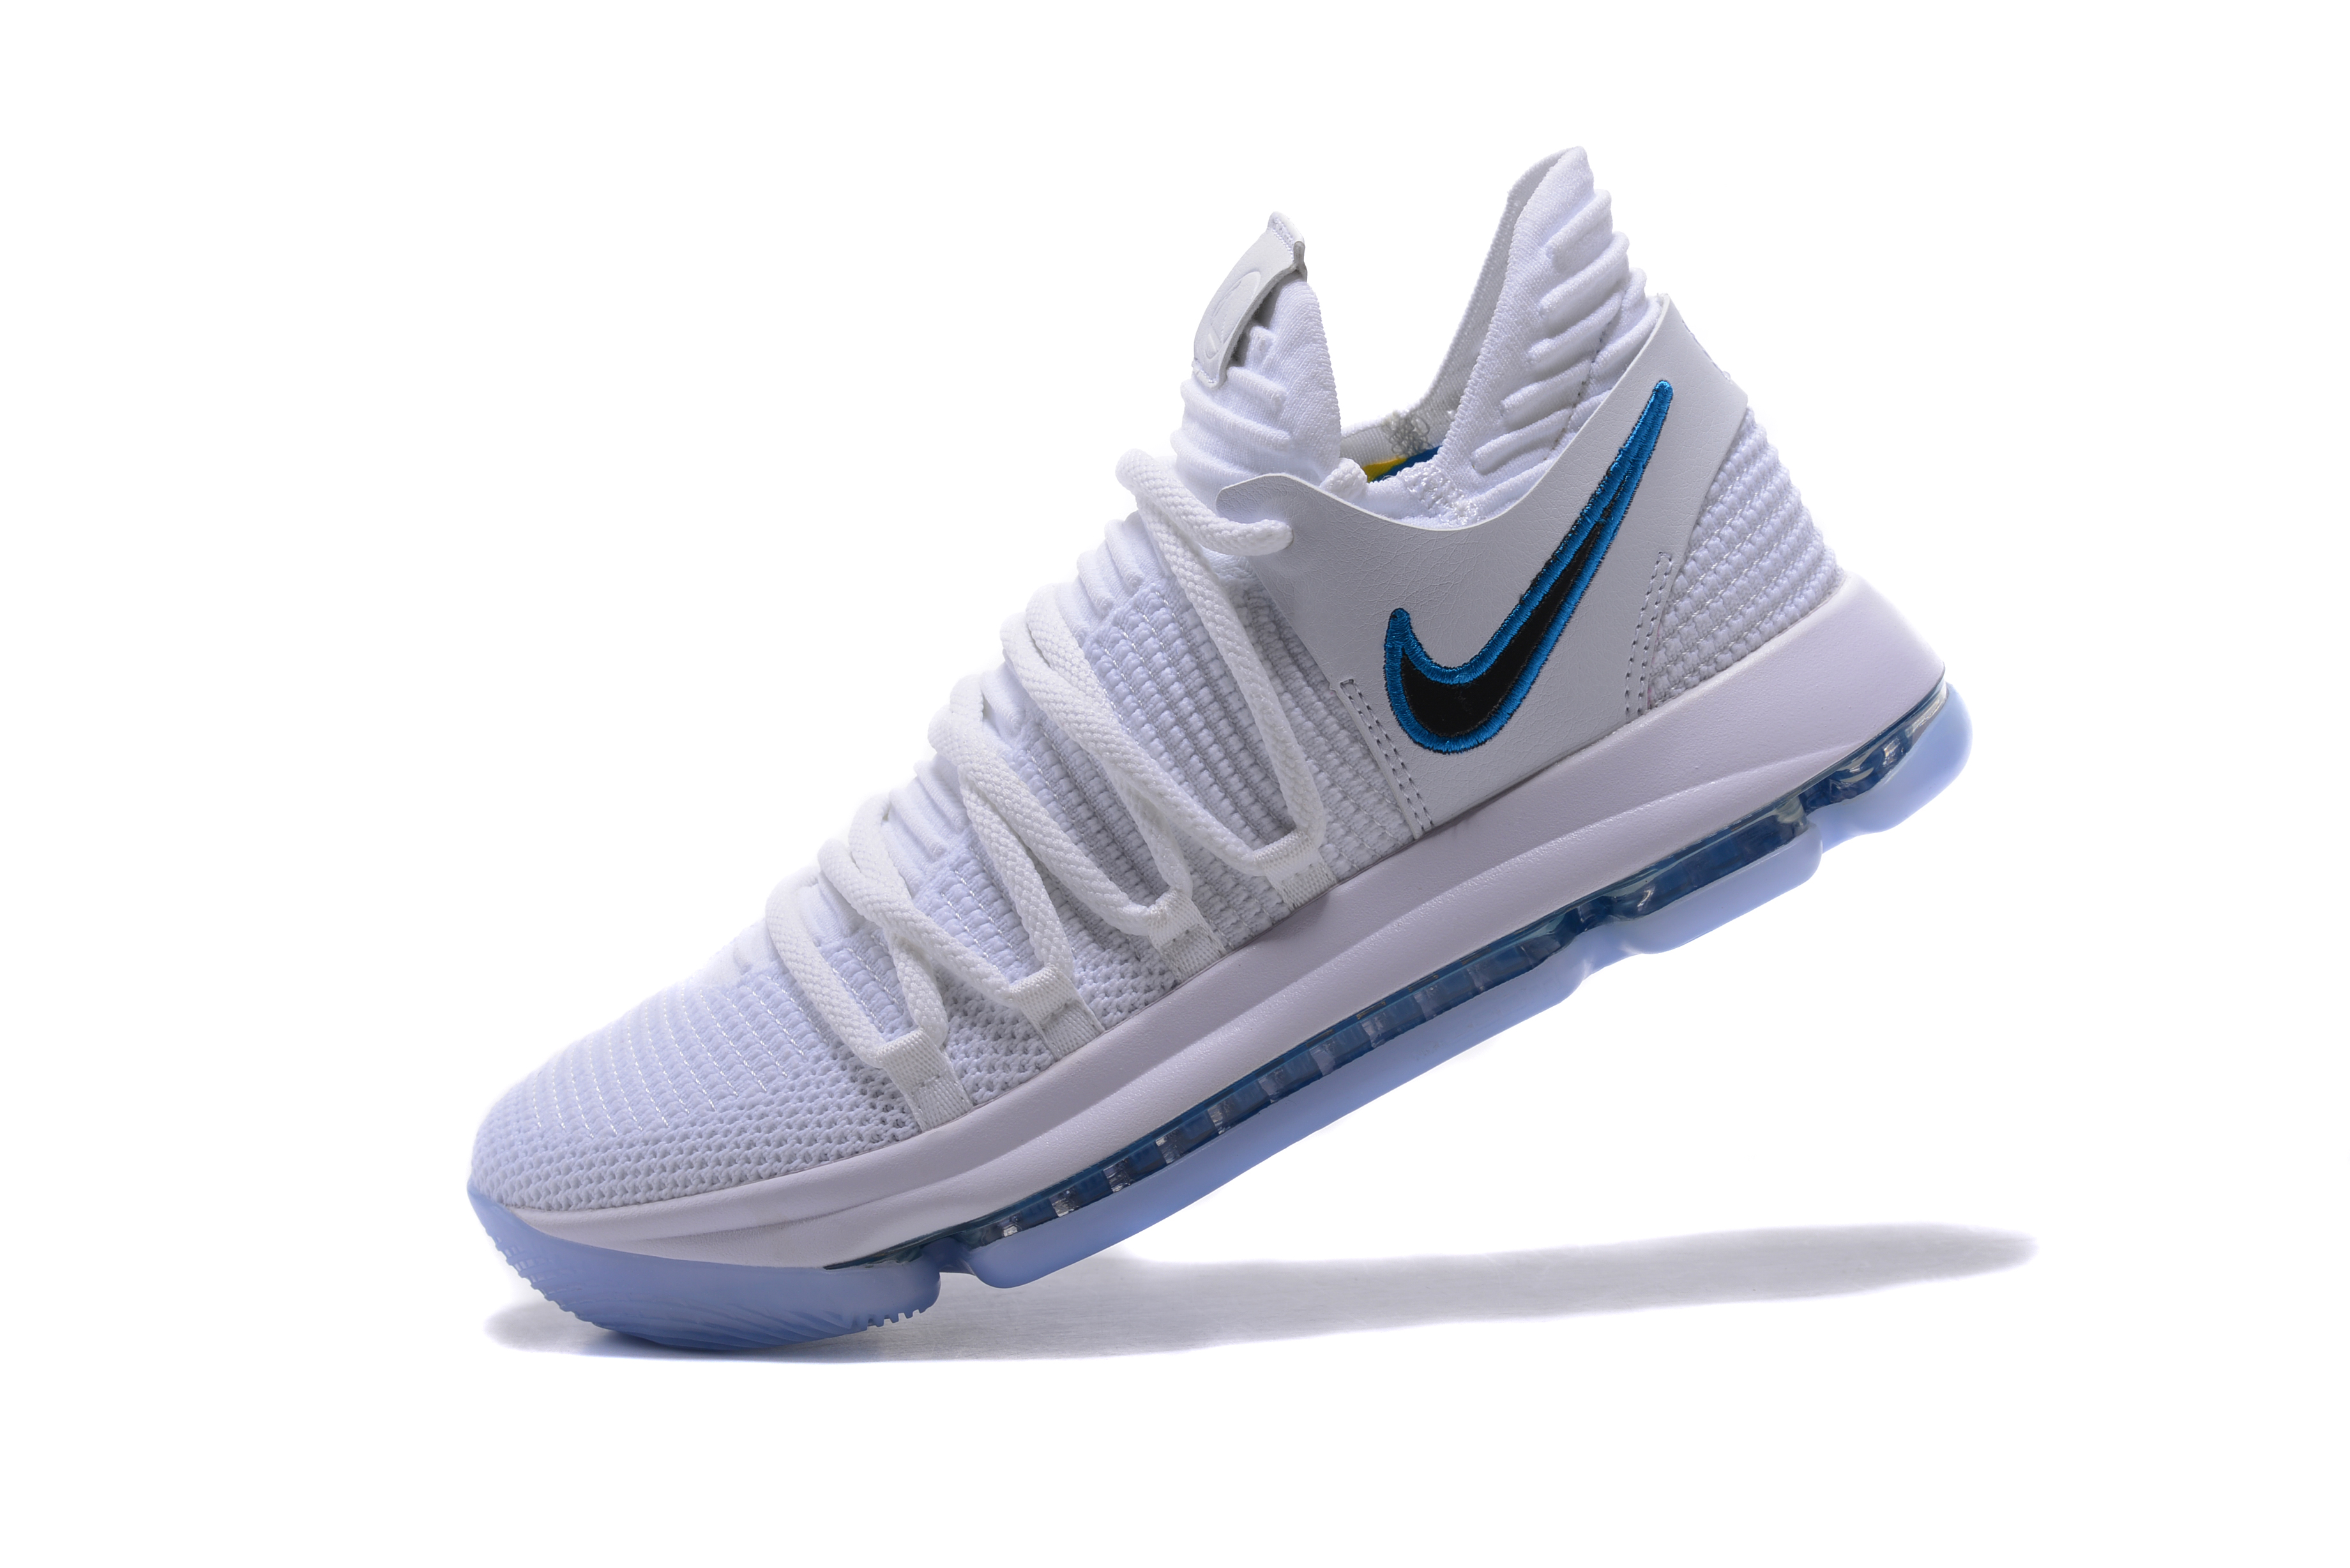 kd 10 white and gold